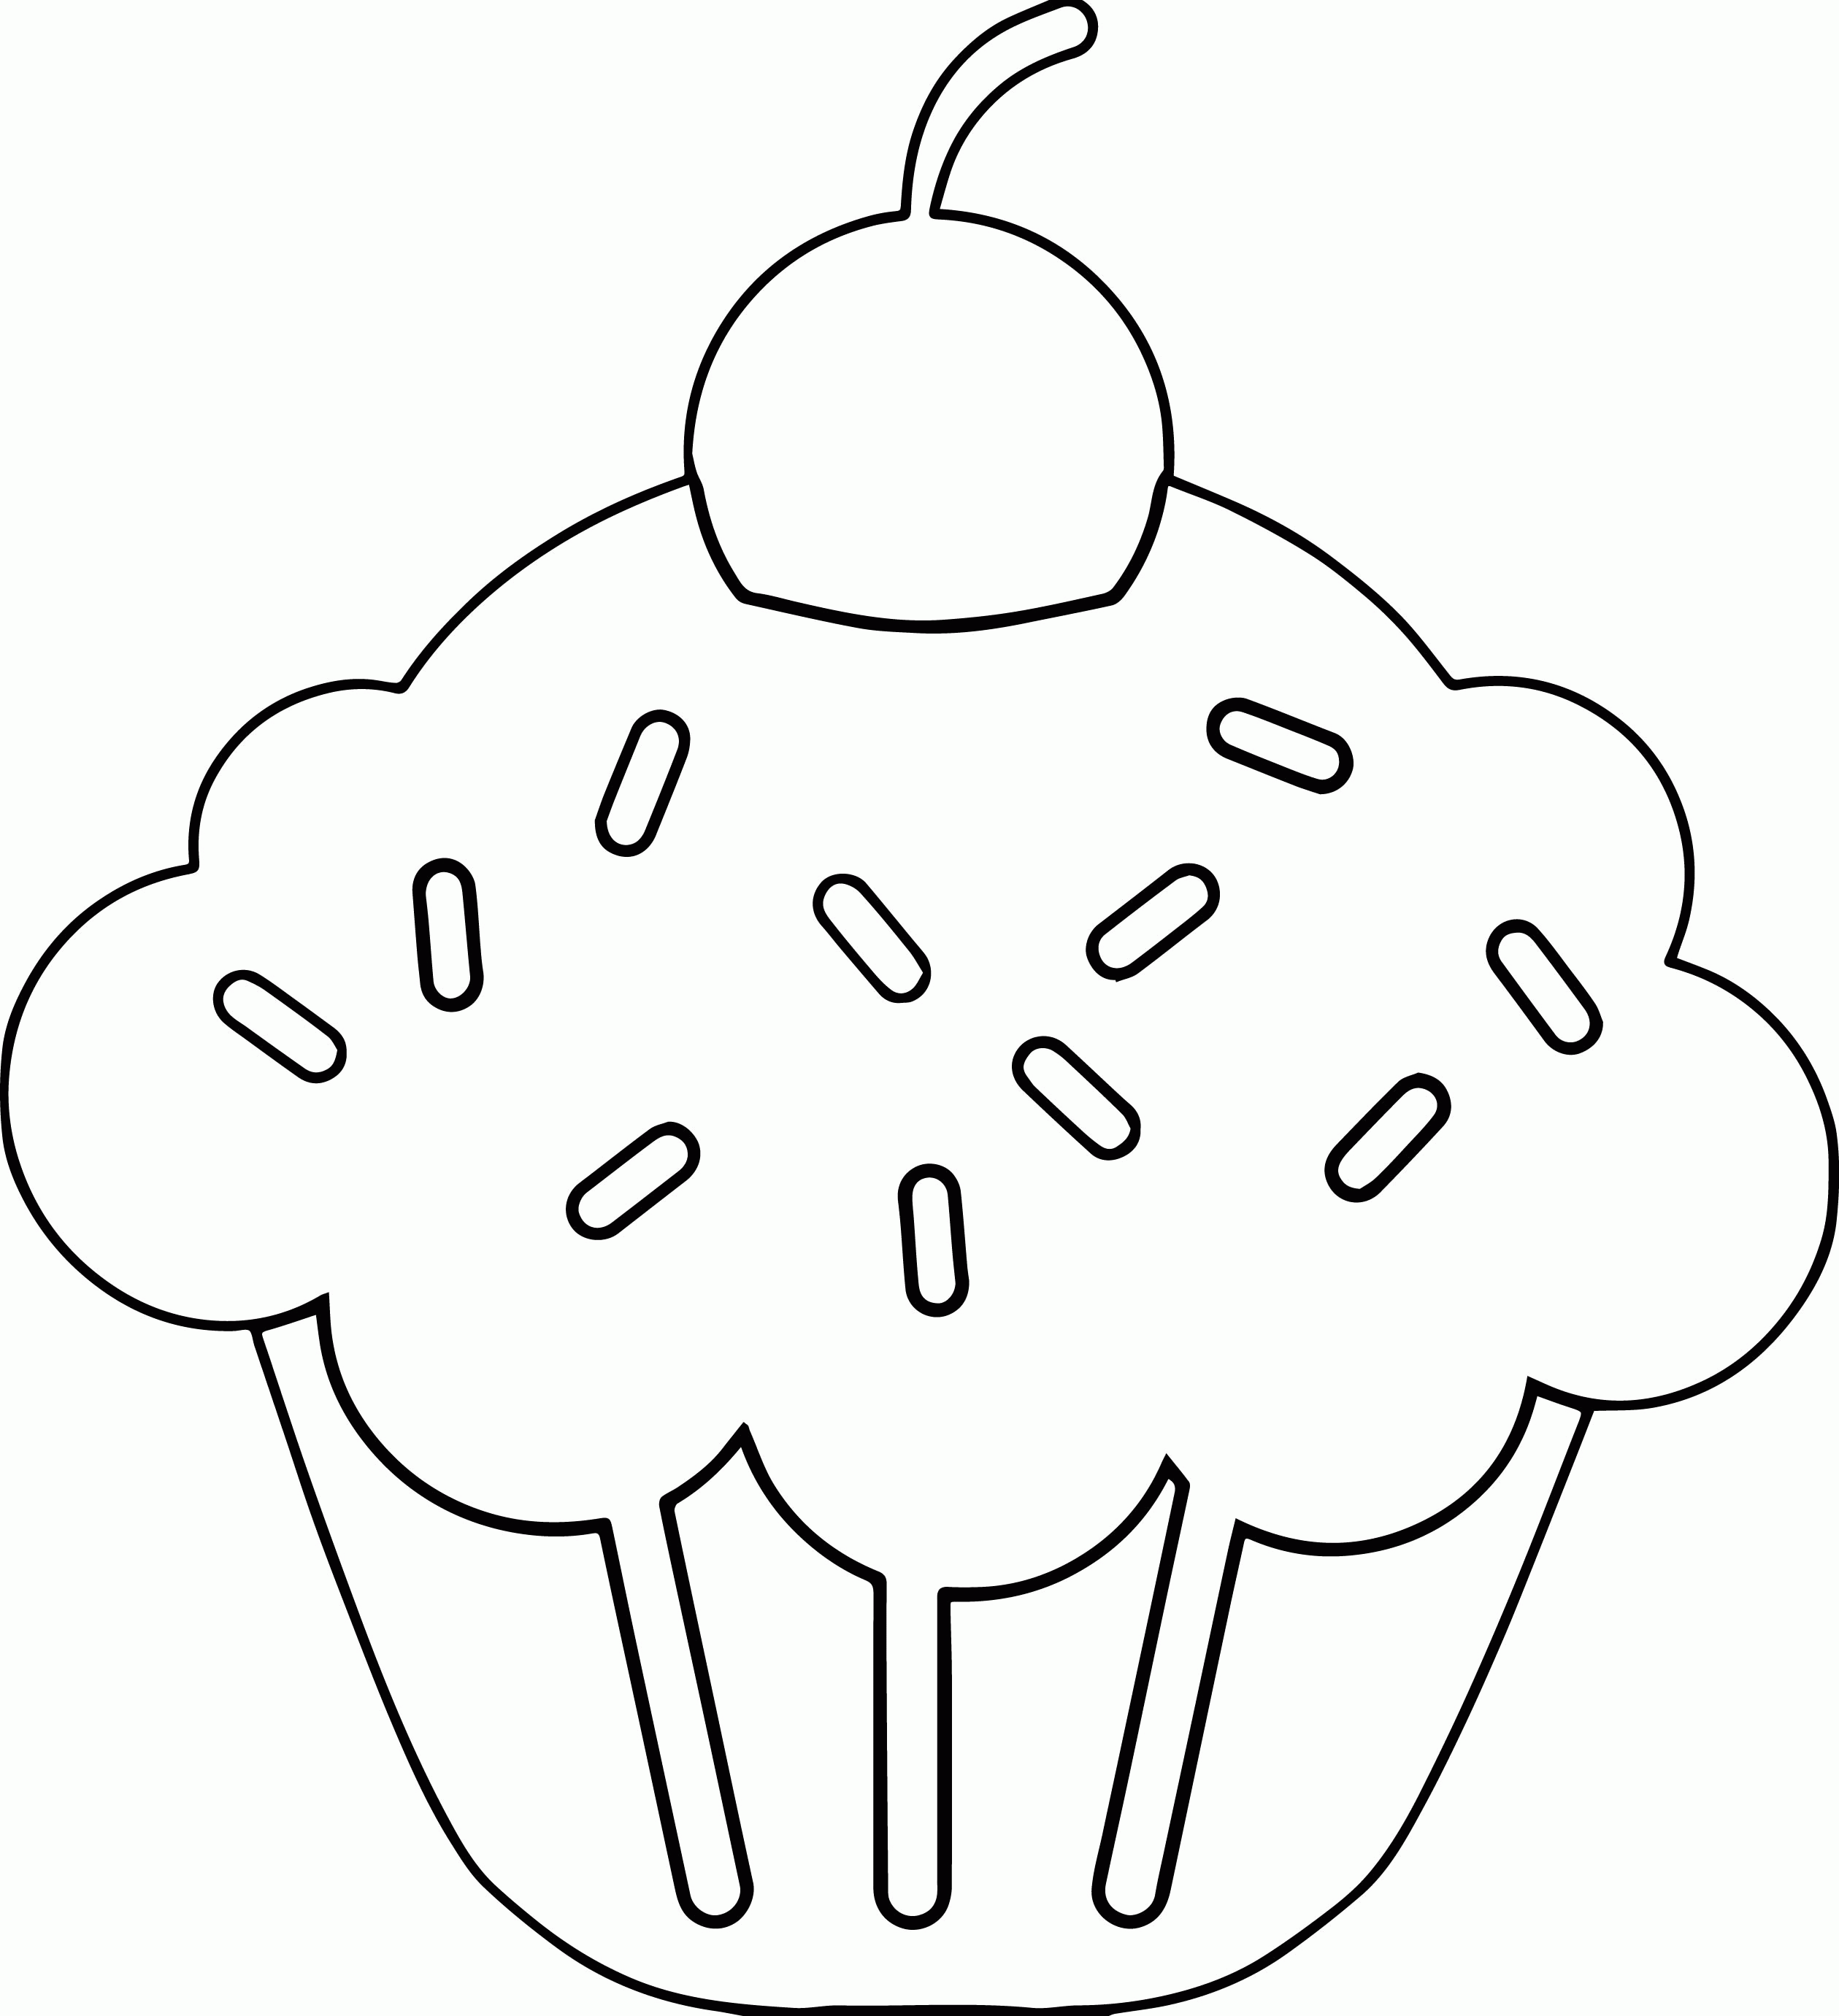 Cupcake Cup Cake Coloring Page 78 | Wecoloringpage